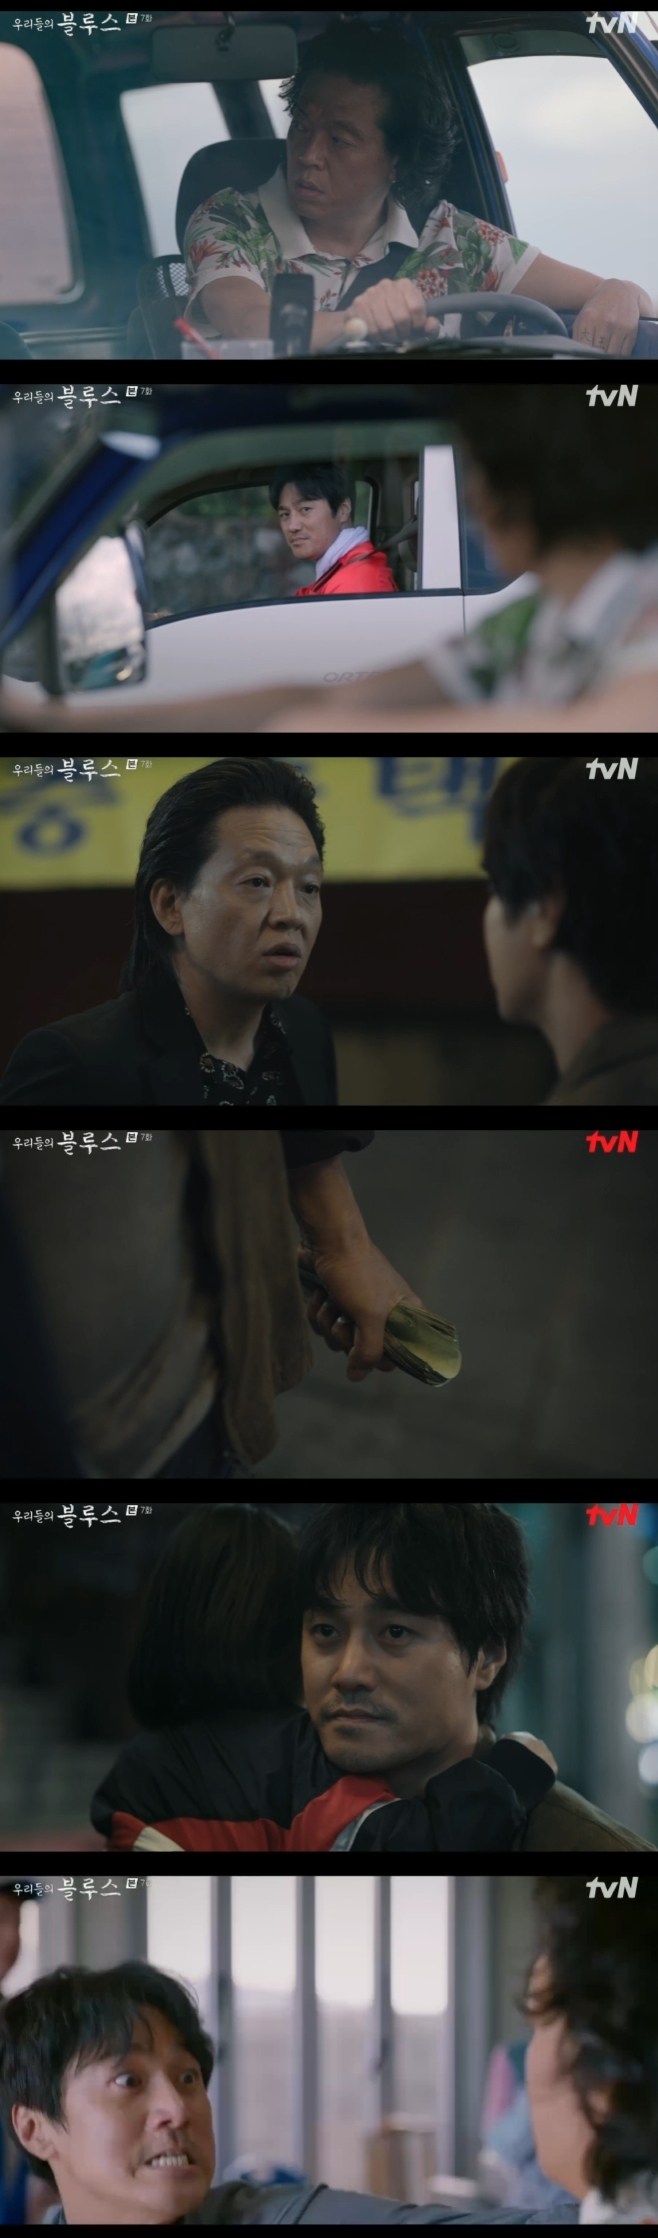 Our Blues Park Ji-hwan, Choi Young-jun, who relied on each other, revealed the reason for Gala Rizzatto.In the 7th episode of the TVN Saturday drama Our Blues (playplayed by Noh Hee-kyung and directed by Kim Kyu-tae), which aired on the 30th night, the past stories of Choi Jung-in and Choi Young-jun were revealed.On that day, airing stock (Roh Yoon-seo) held hands with Chung Hyeon (Bae Hyun-sung) and told him his future plans.He said: Plan A, Im going to tell our Fathers about our condition now, and Im going to continue going to school, asking them to raise a house and a child for us to live in.The baby will be born during the winter vacation, so there is no problem with attendance. Chung Hyeon also revealed: Im going to quit school, adding: Cant you go to school with me?I do not want to ask Father to pay for the diaper price for milk powder, but I am not a medical school anyway.Even if you want to do it, you come out of medical school and I go to study then I am twenty-five. When he heard this, the airing stock said, Its good. Its good. Youre young. Lets do it. Weve also set up Plan B.We will have a child, whatever the Fathers say, so I go to the unmarried mothers house and solve the accommodation. The same evening the two Confessions the truth to their fathers.As Chung Hyon predicted, Choi Jung-in Kwon (Park Ji-hwan) punched himself, and Choi Young-jun, who could not hit his daughter, beat him and screamed.However, their will did not break down in the assault of human rights and the tears of the ceremony.Youre not in love with me, what else are you going to raise your child with? The two men said to the fathers who doubted, Its not wrong. Its not a mistake.I have never been in my way. I love each other. Its not a mistake, its love. Thats why it is.The next day Chung Hyon and the lord went to school and Confessions were pregnant.When the counselor mentioned the transfer of the two, Chung Hyeon said, I will quit school today, but there is no reason for the lord to transfer or quit school.The student has the right not to be discriminated against for reasons such as pregnancy and childbirth. It is the content of the student human rights ordinance. The counselor replied, Once both fathers are brought. In addition, the reason why human rights and hospice growl when they look at each other is revealed. The words of human rights that we had thought about the past were a big hurt to the hospice.Human rights advised him to stop borrowing money from him because of his gambling, and then he starved his daughter, and he went to human rights with the lord and said, Lending me one last time.The lord did not eat rice. The human rights that misunderstood this situation said, Do you want to use your child to make an angry.This is a bitch, he said, breaking his pride, and he left the money he received and started a new start.